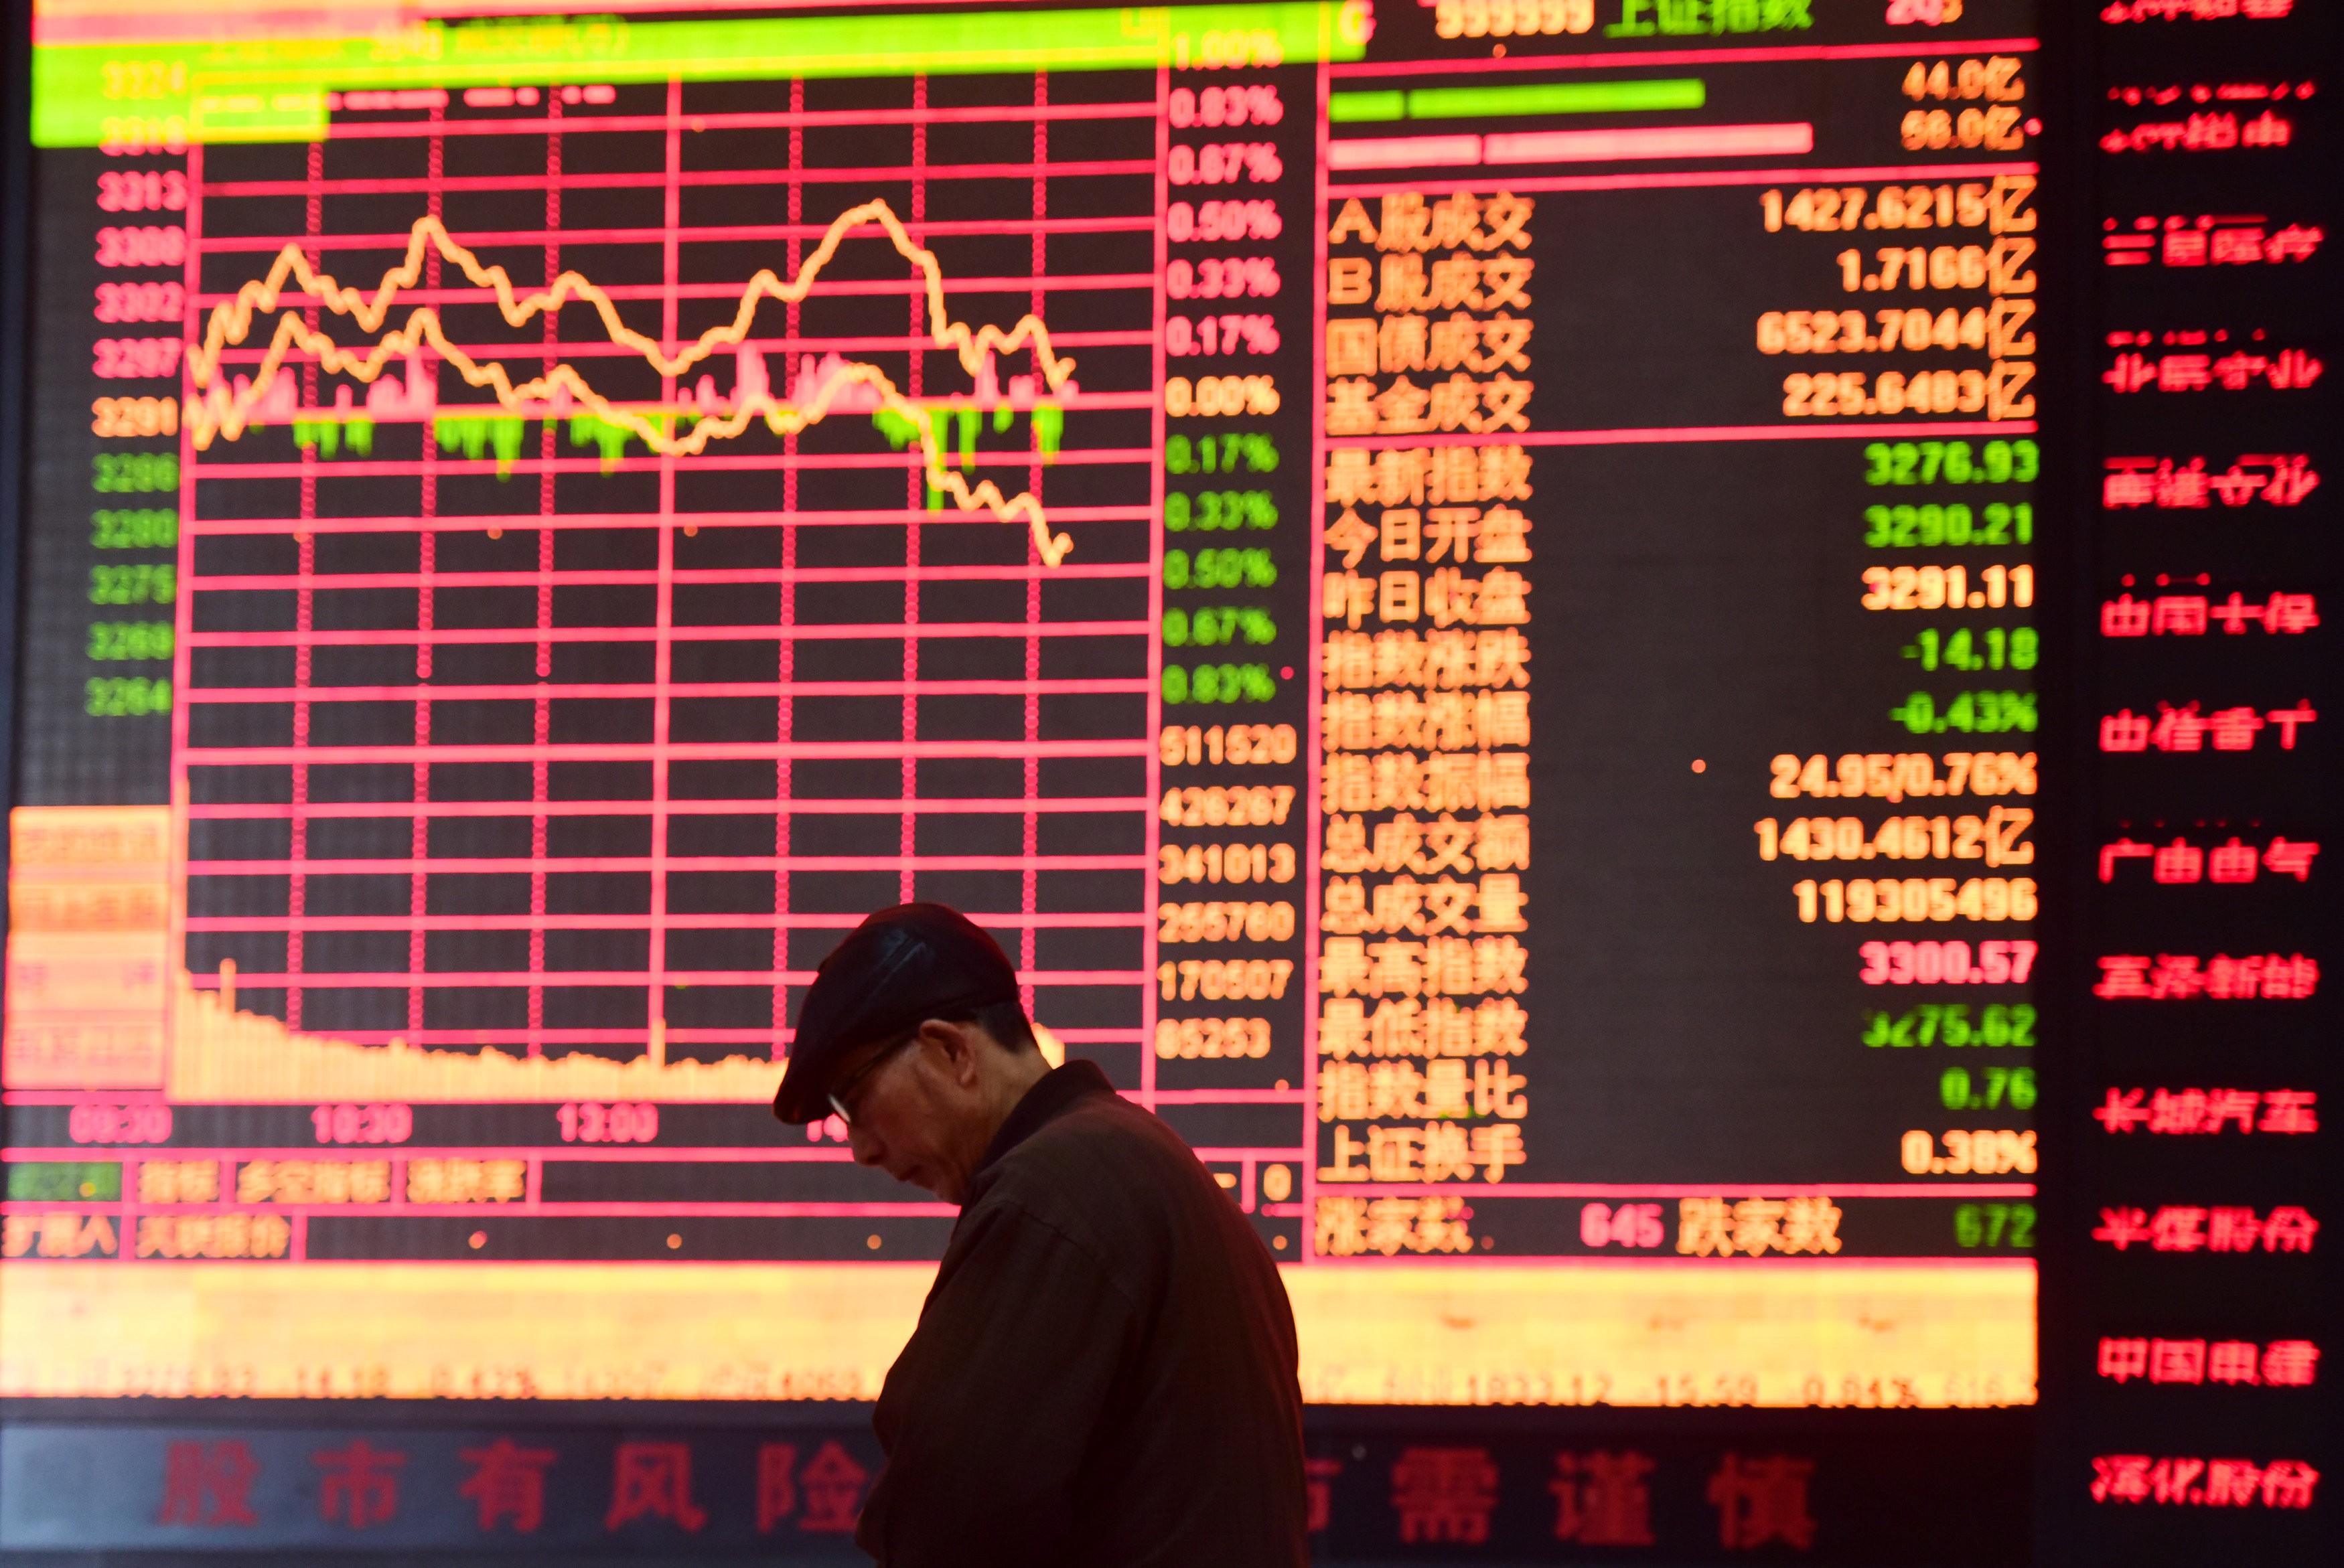 A man is seen against an electronic board showing stock information at a brokerage house in Fuyang in Anhui province on March 16, 2018. Contrary to global conventions, China’s stock exchanges use red to denote gains and advances, using the colour green to represent losses and declines. Photo: REUTERS